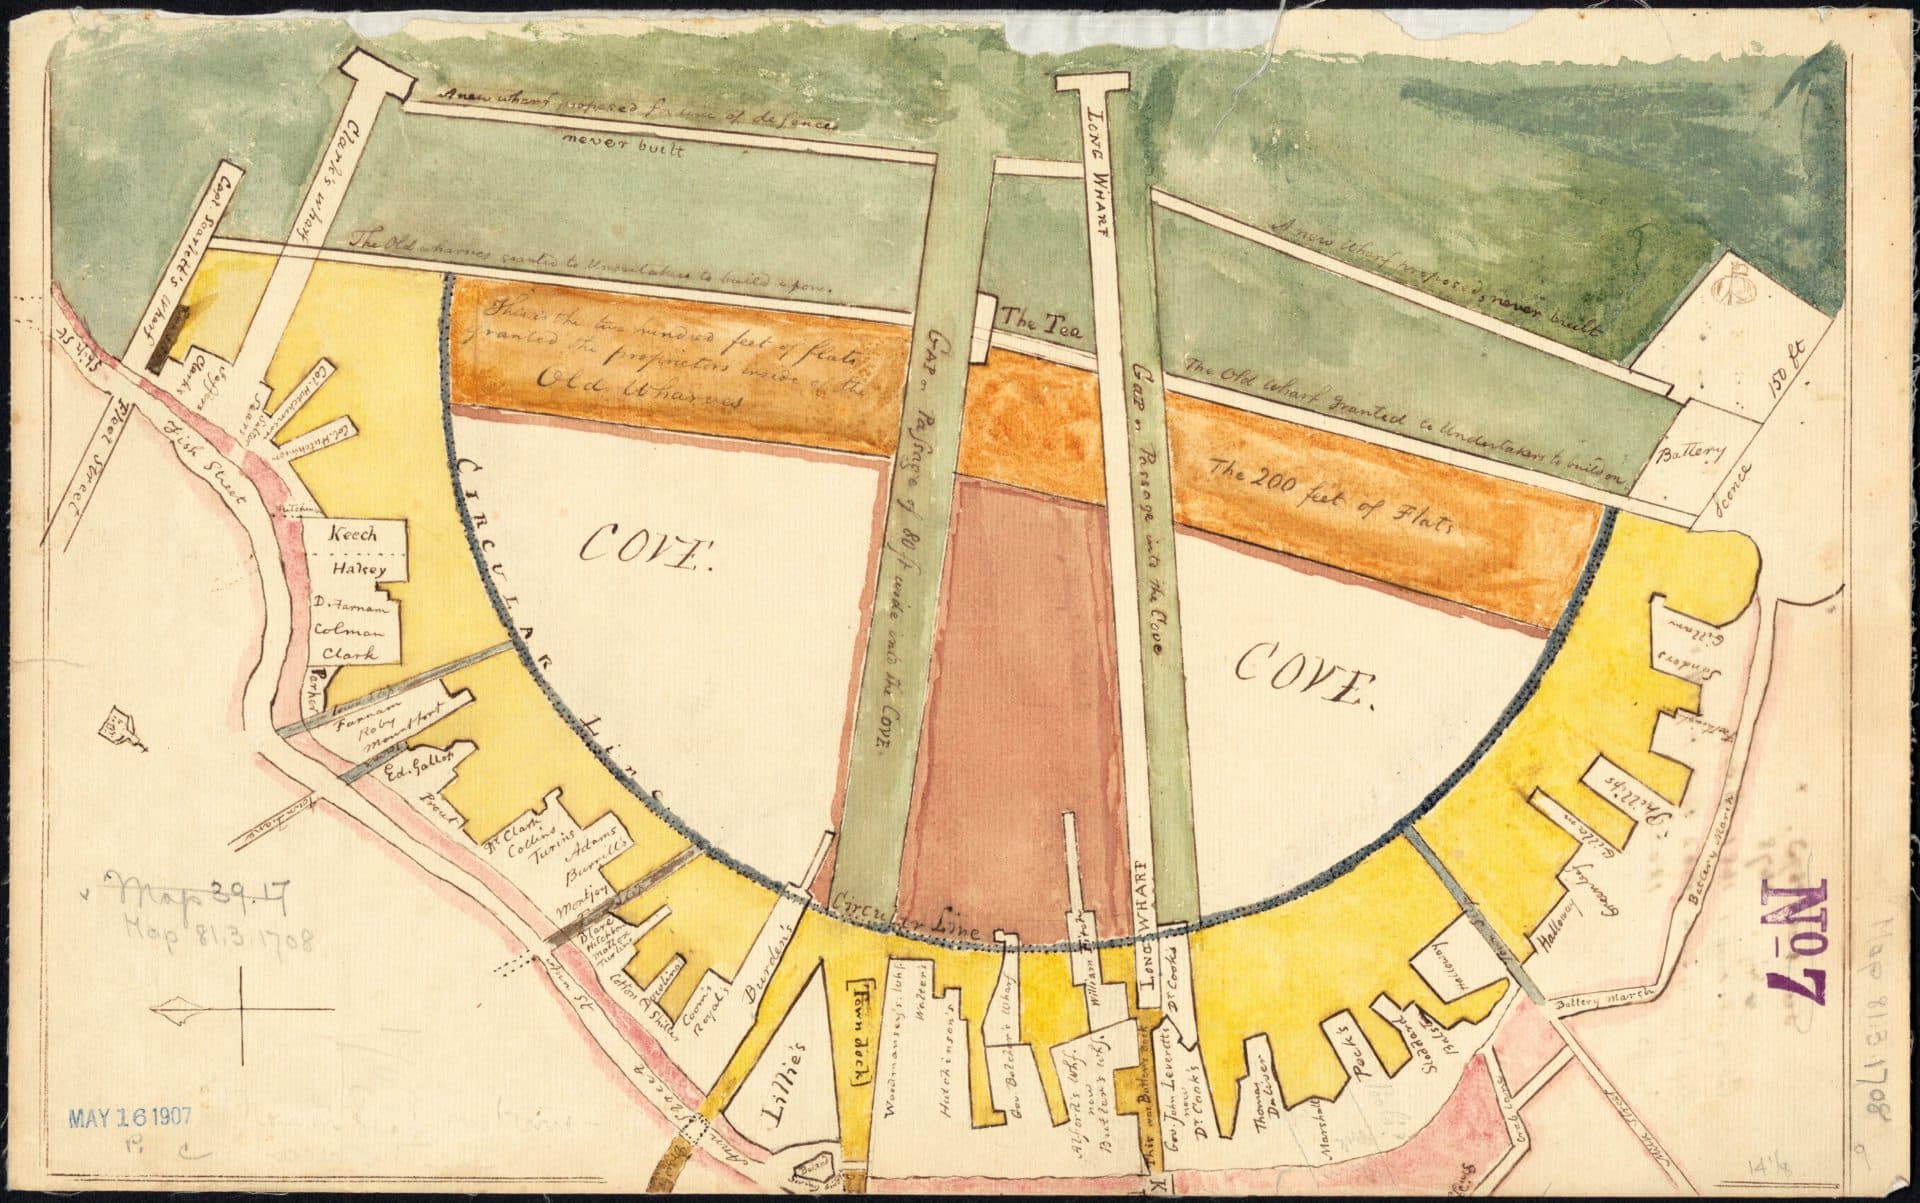 Caleb H. Snow after Jacob Sheafe, Manuscript plan showing wharves of Boston (ca. 1820, original 1708). (Courtesy Leventhal Map &amp; Education Center at the Boston Public Library)